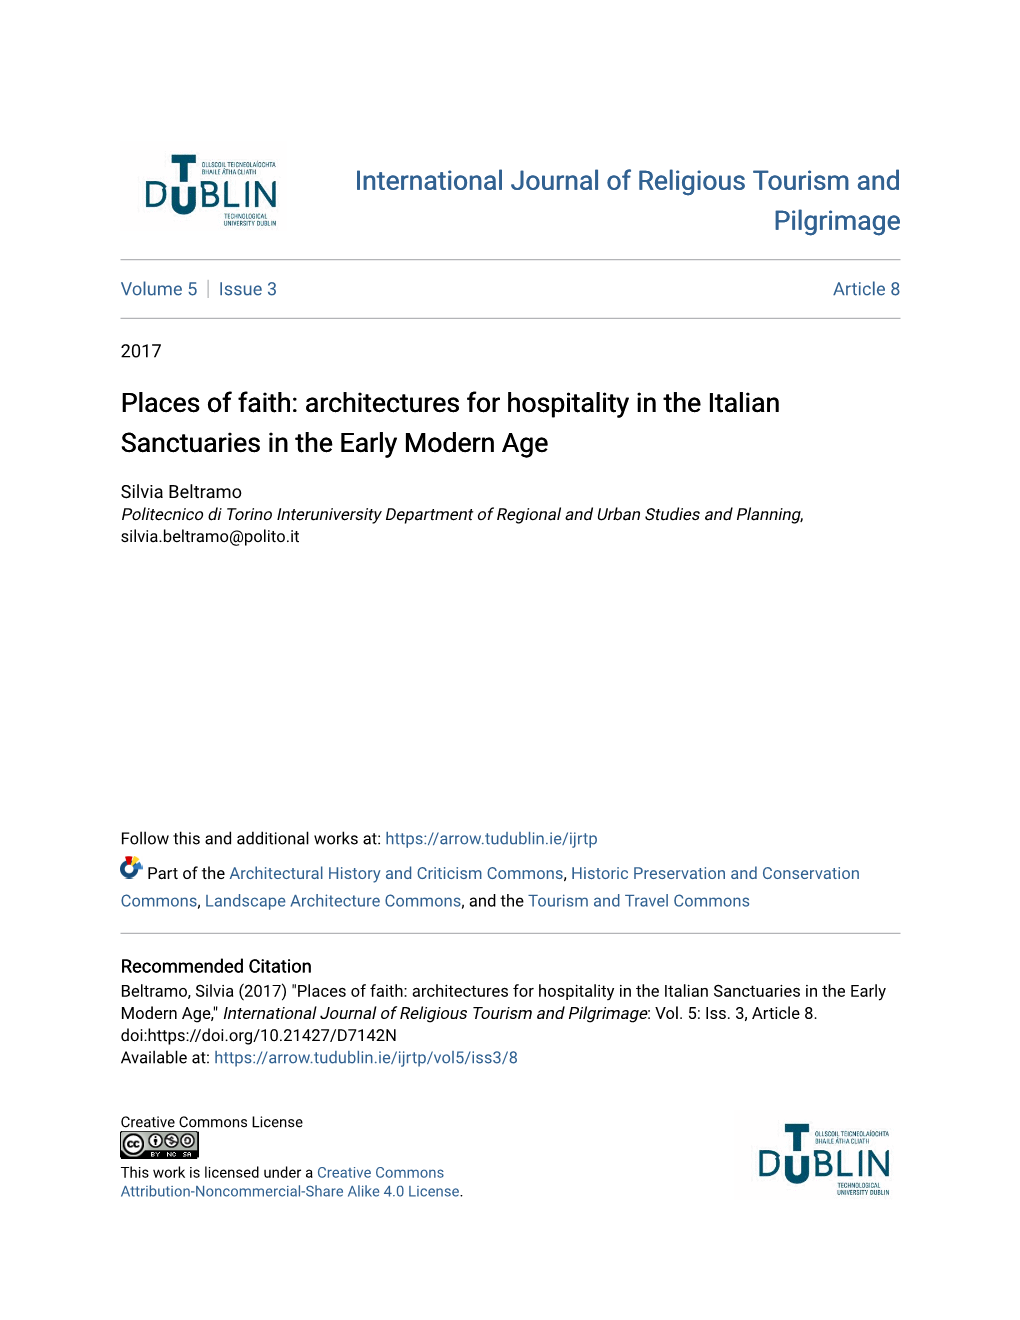 Places of Faith: Architectures for Hospitality in the Italian Sanctuaries in the Early Modern Age